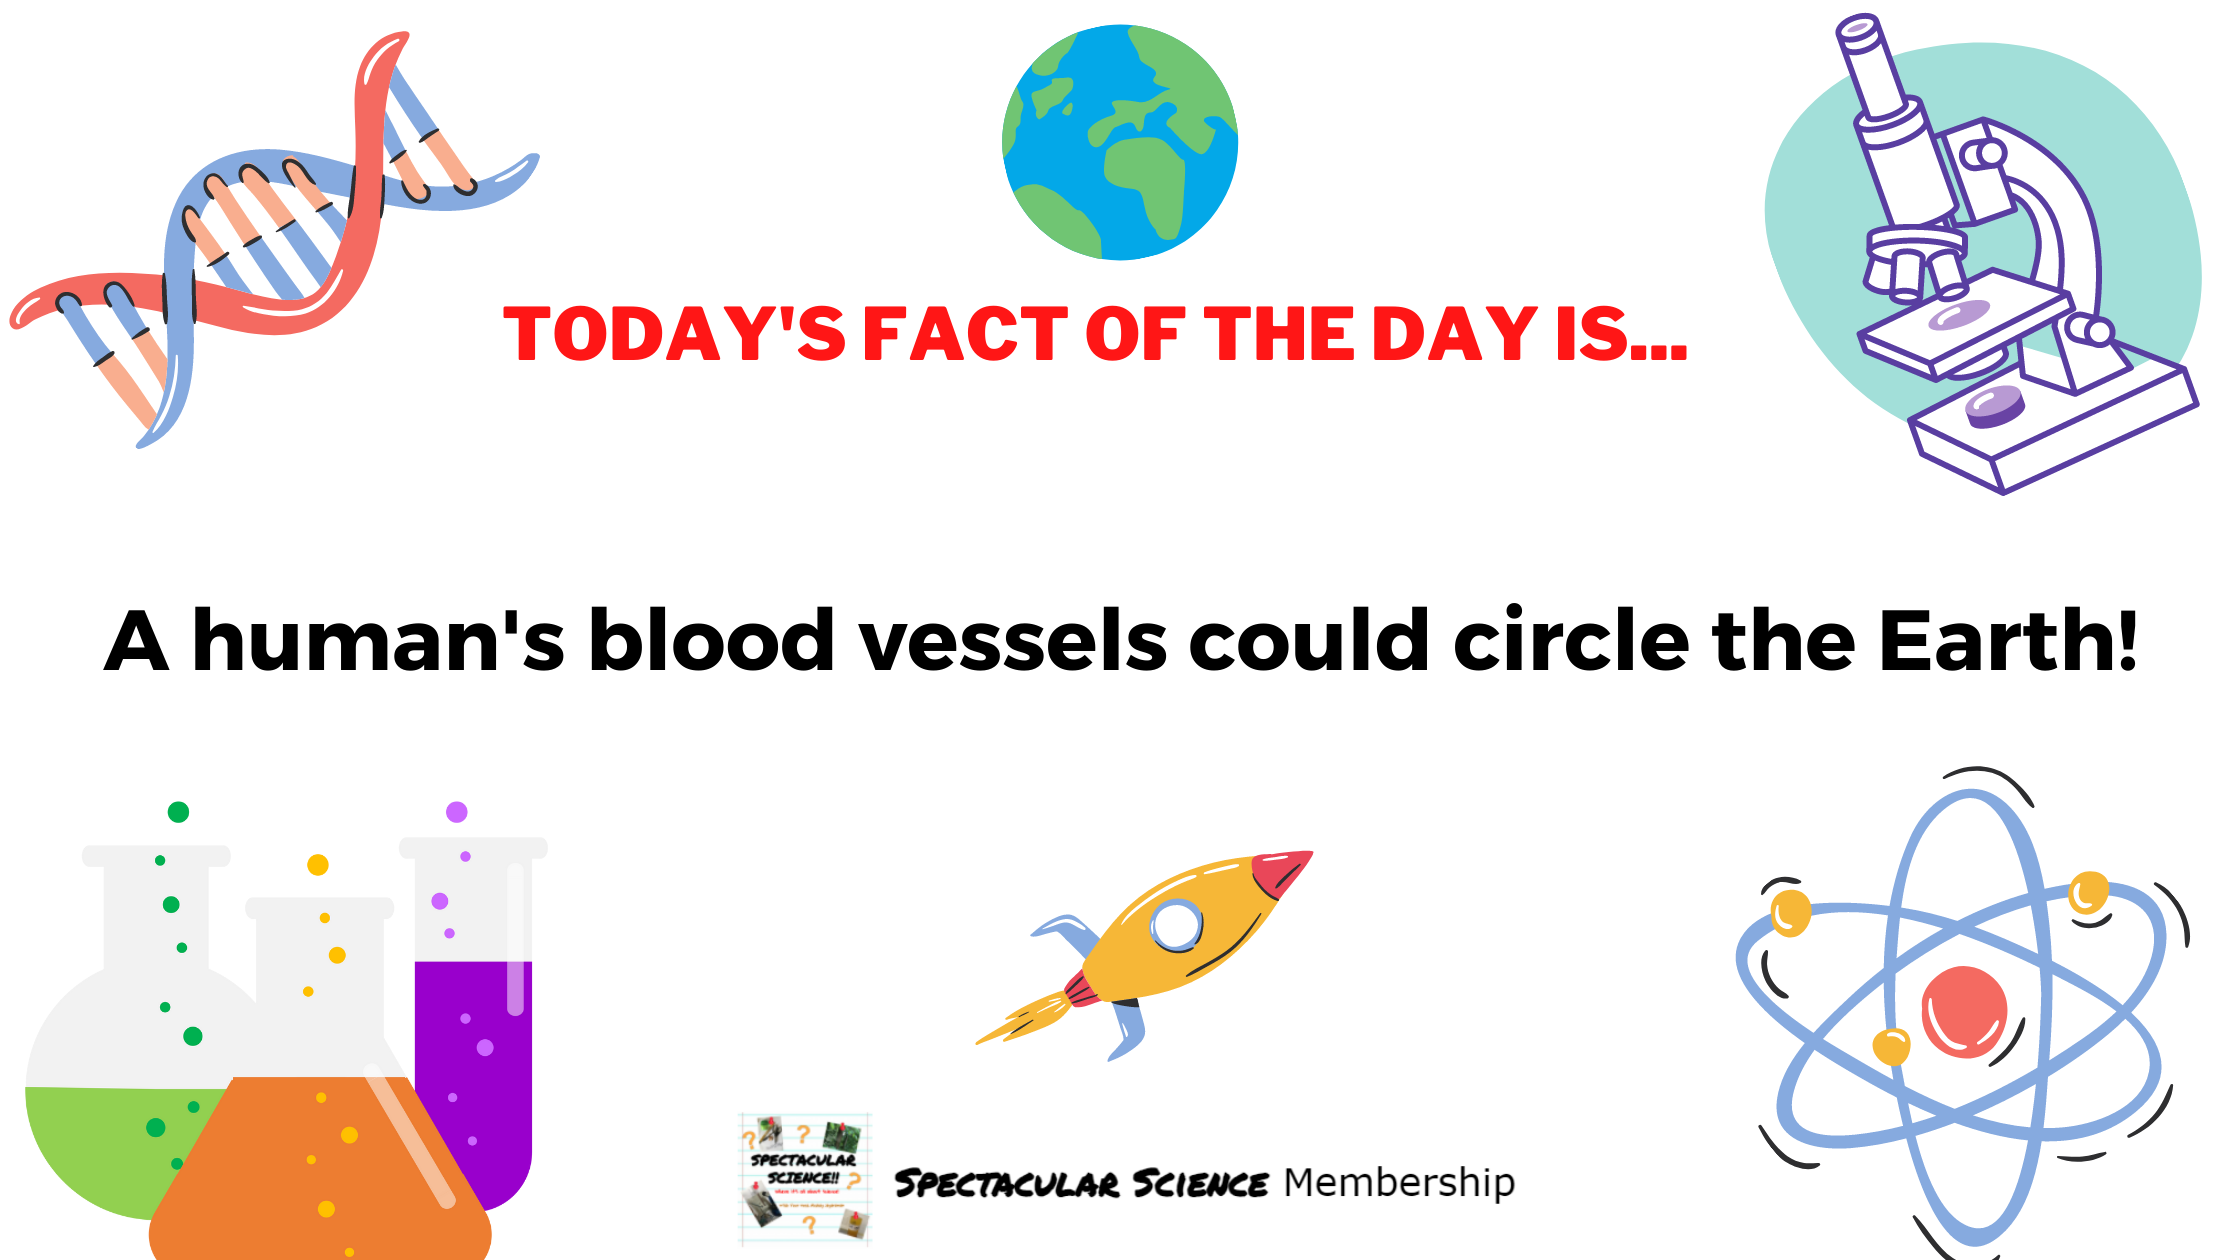 Fact of the Day Image Nov. 25th